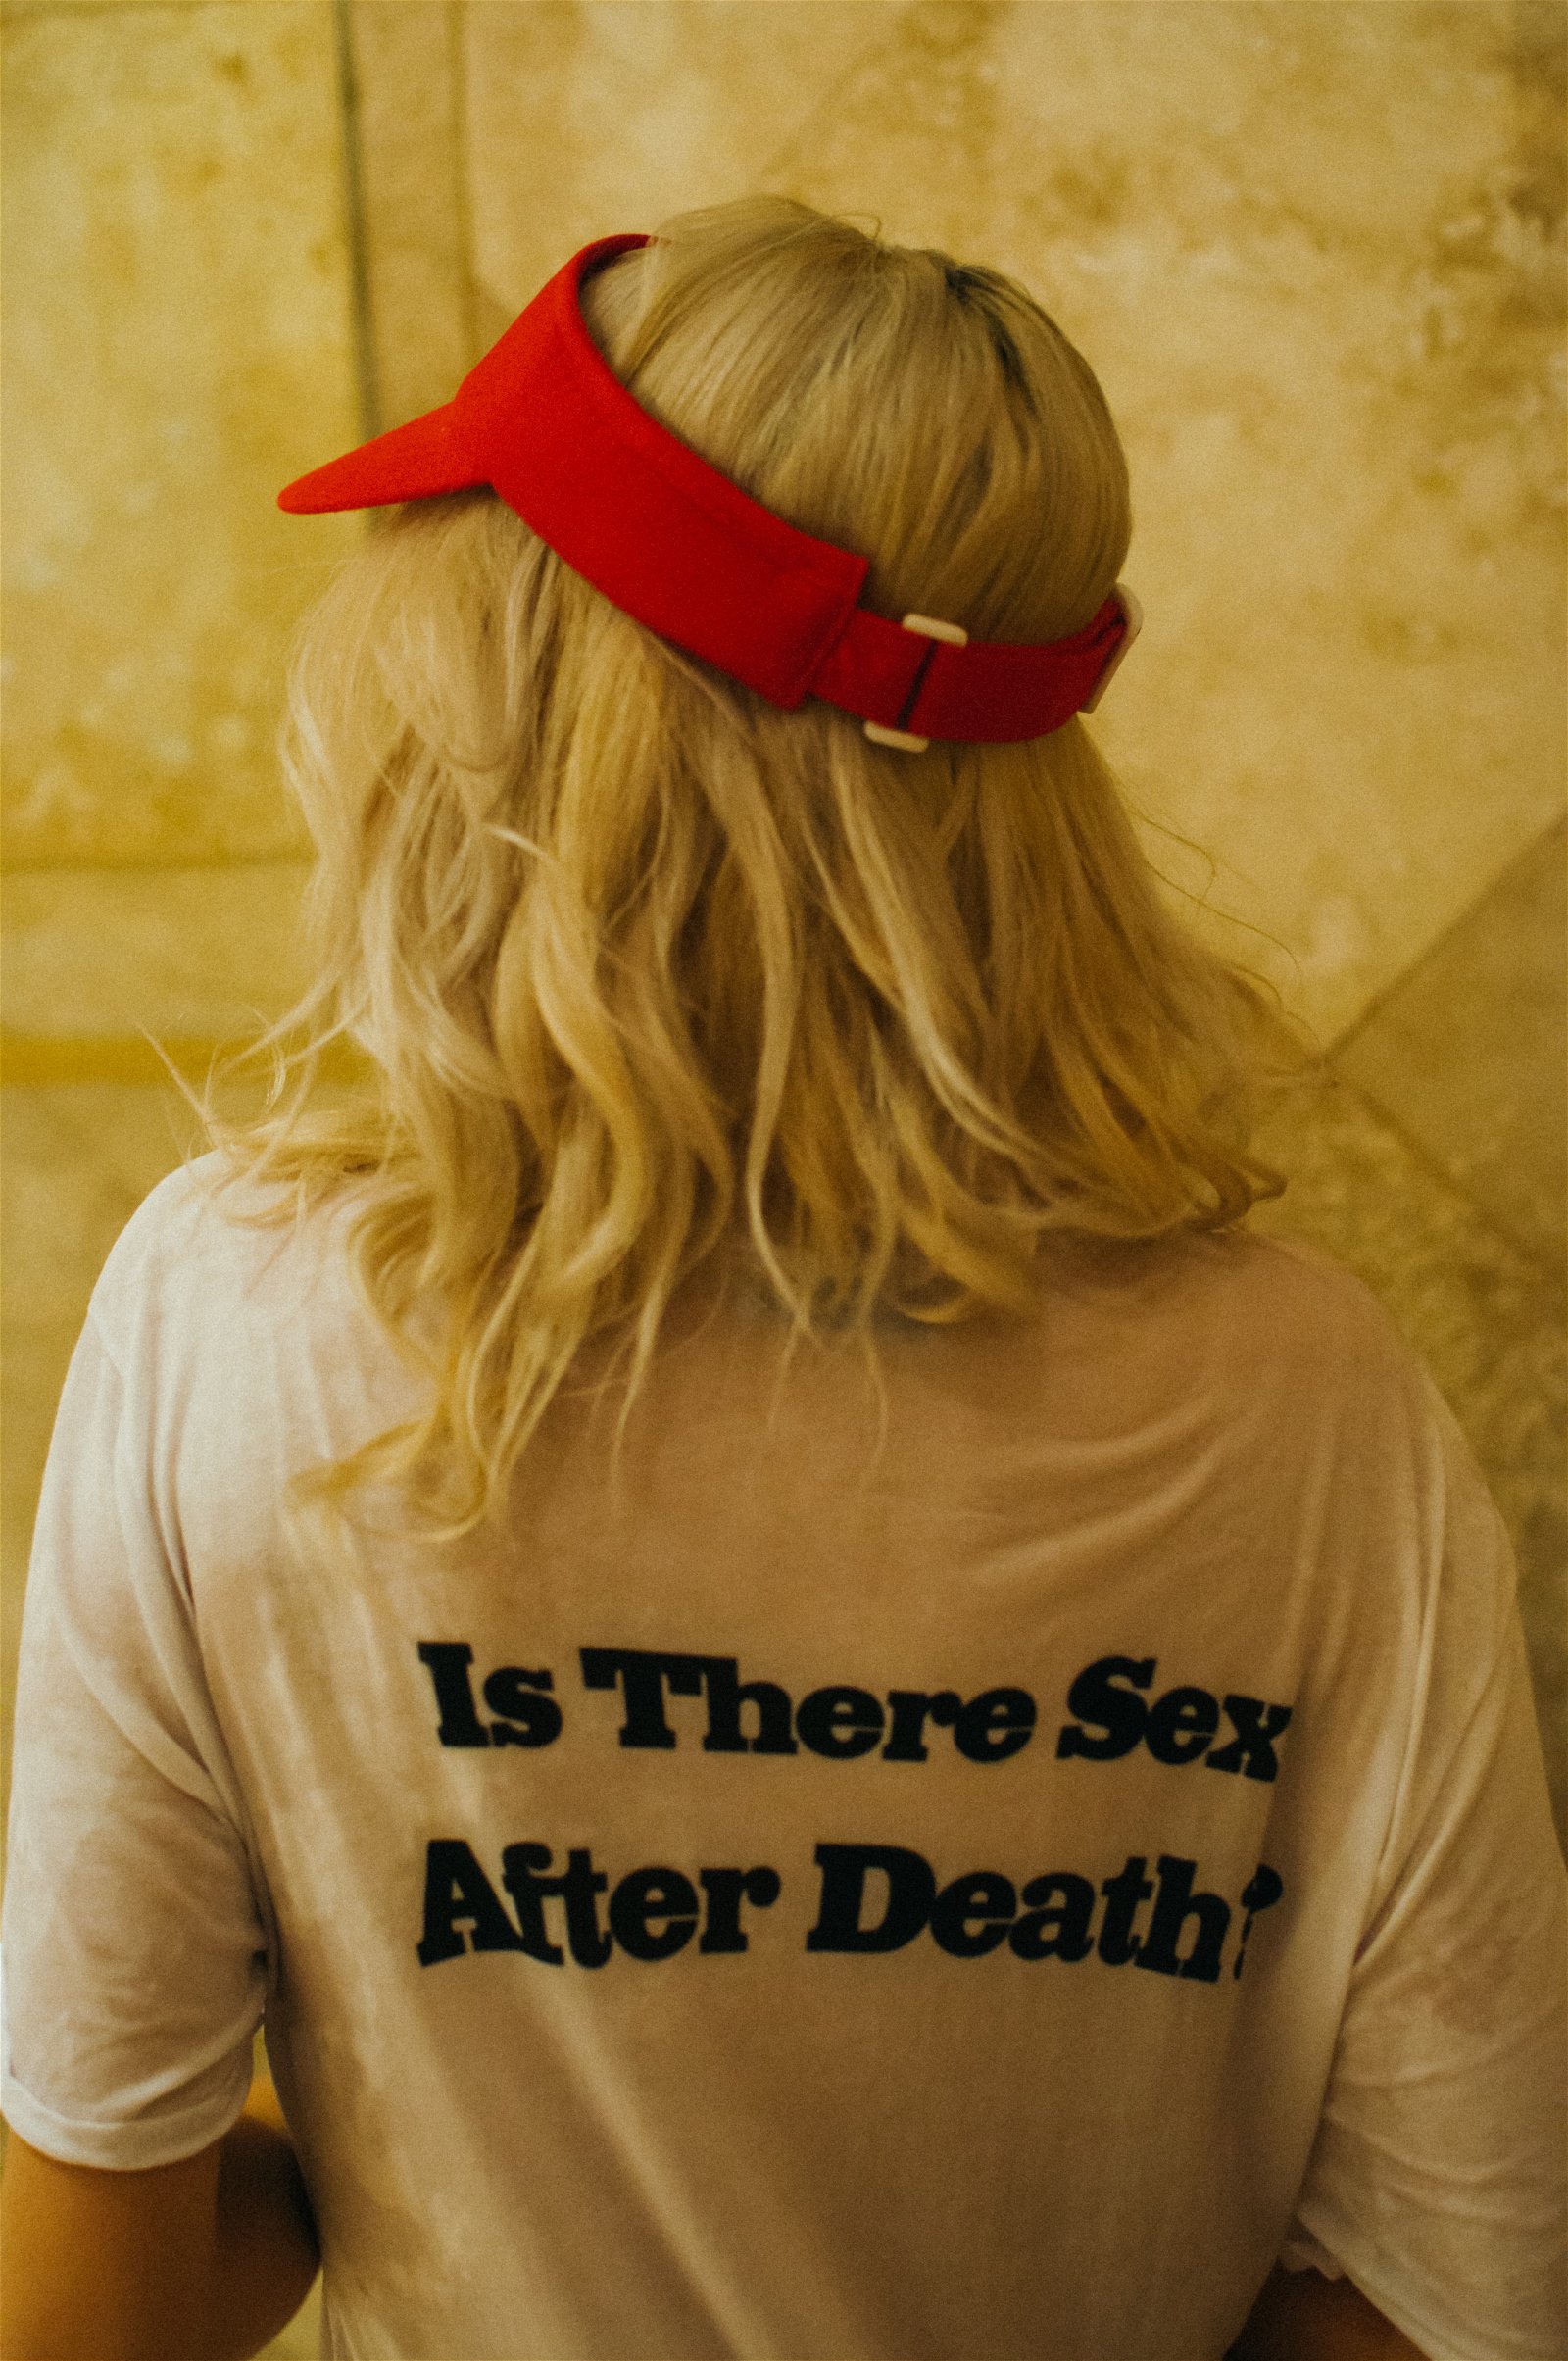 Photo by Masquenada with the username @Masquenada, posted on October 31, 2018 and the text says 'Is there sex after death? ?
Stay horny for your T-Shirt and follow us for more ??? @masquenada.ro'